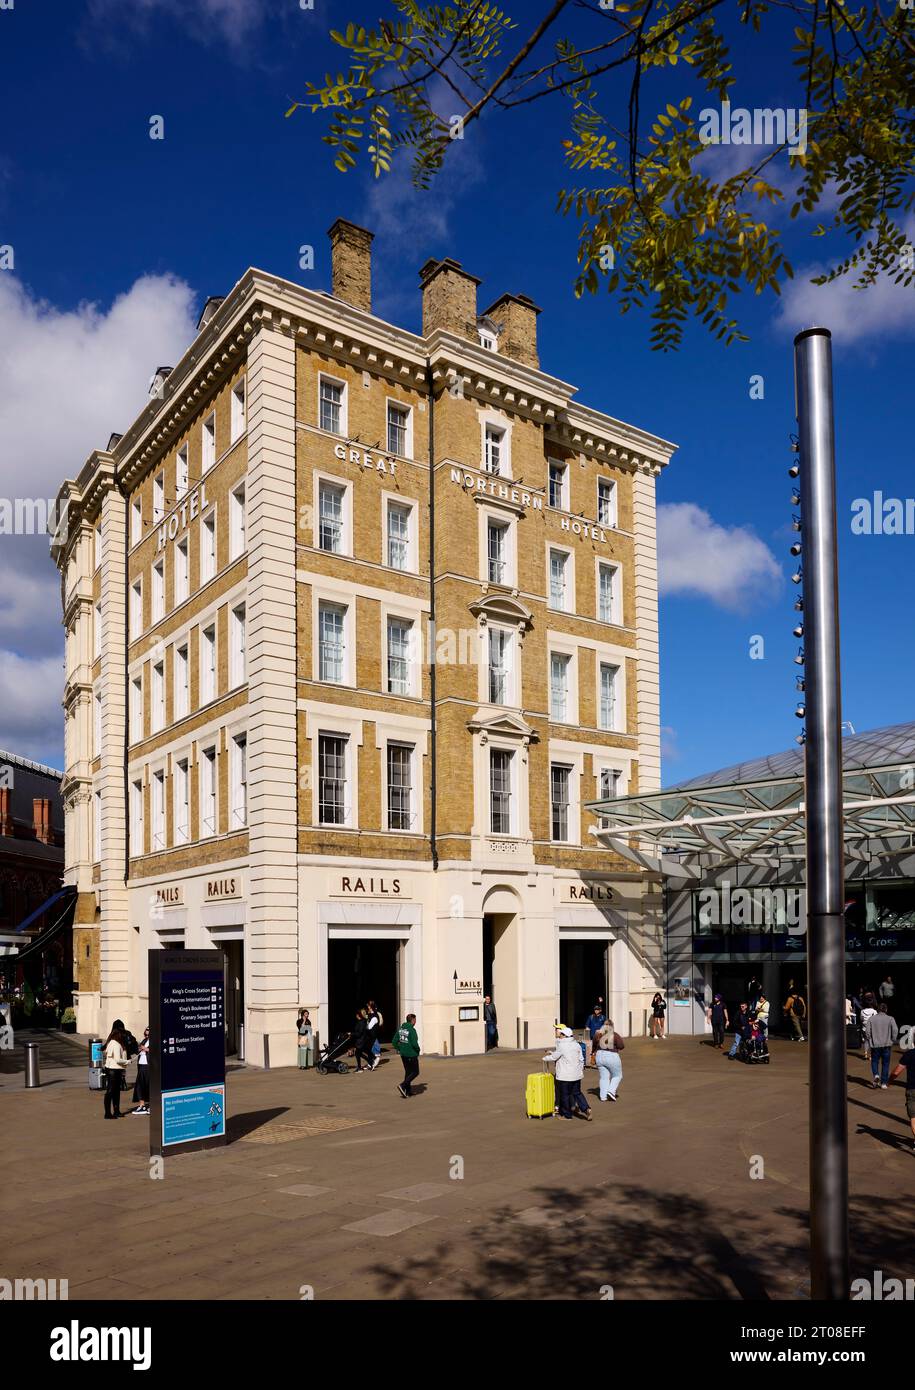 Great Northern Hotel, Kings Cross London Banque D'Images